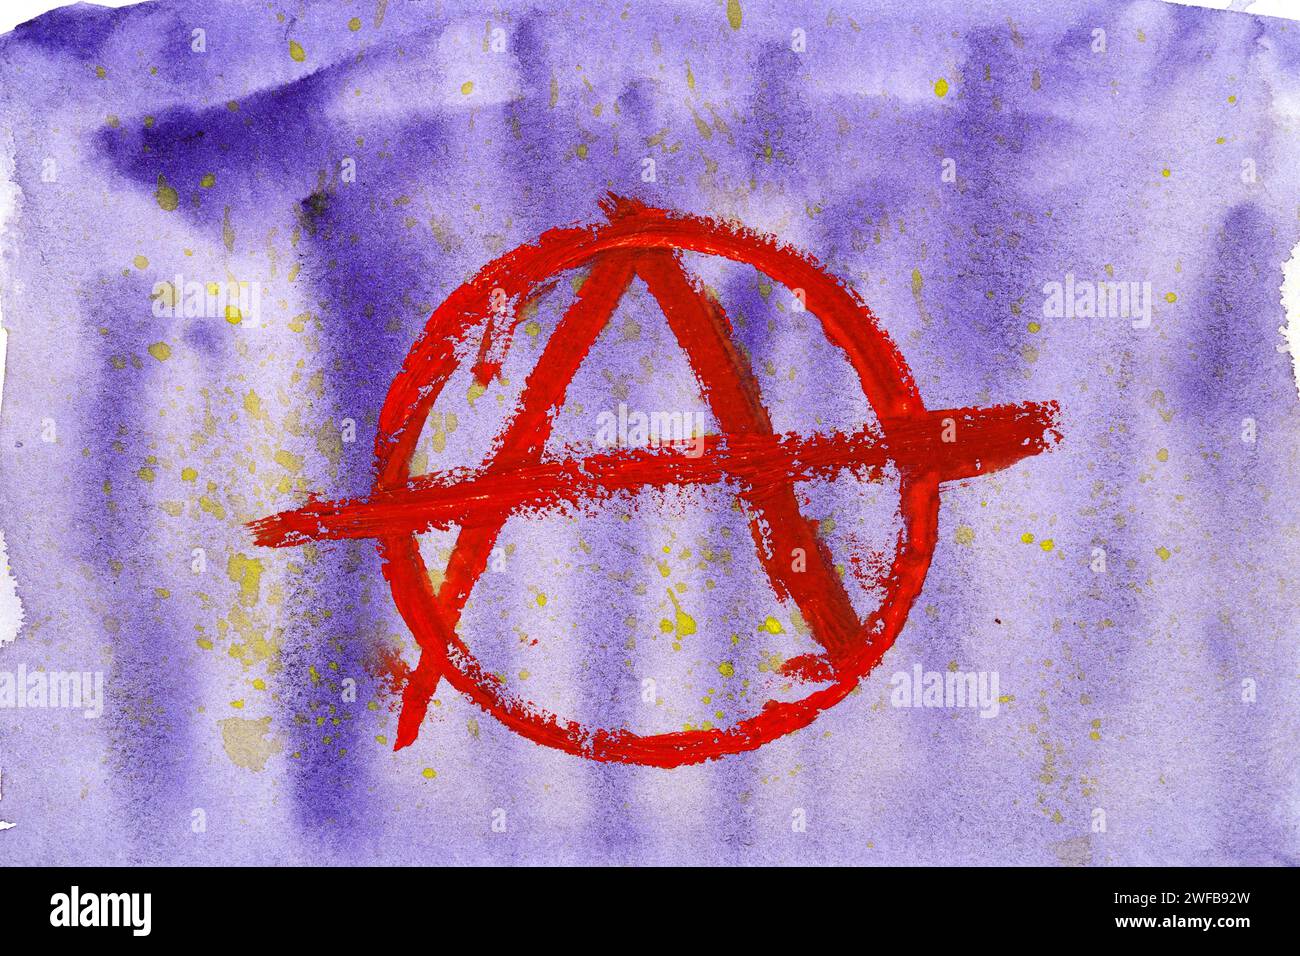 Striking red anarchist emblem painted over a starlike watercolor backdrop Stock Photo